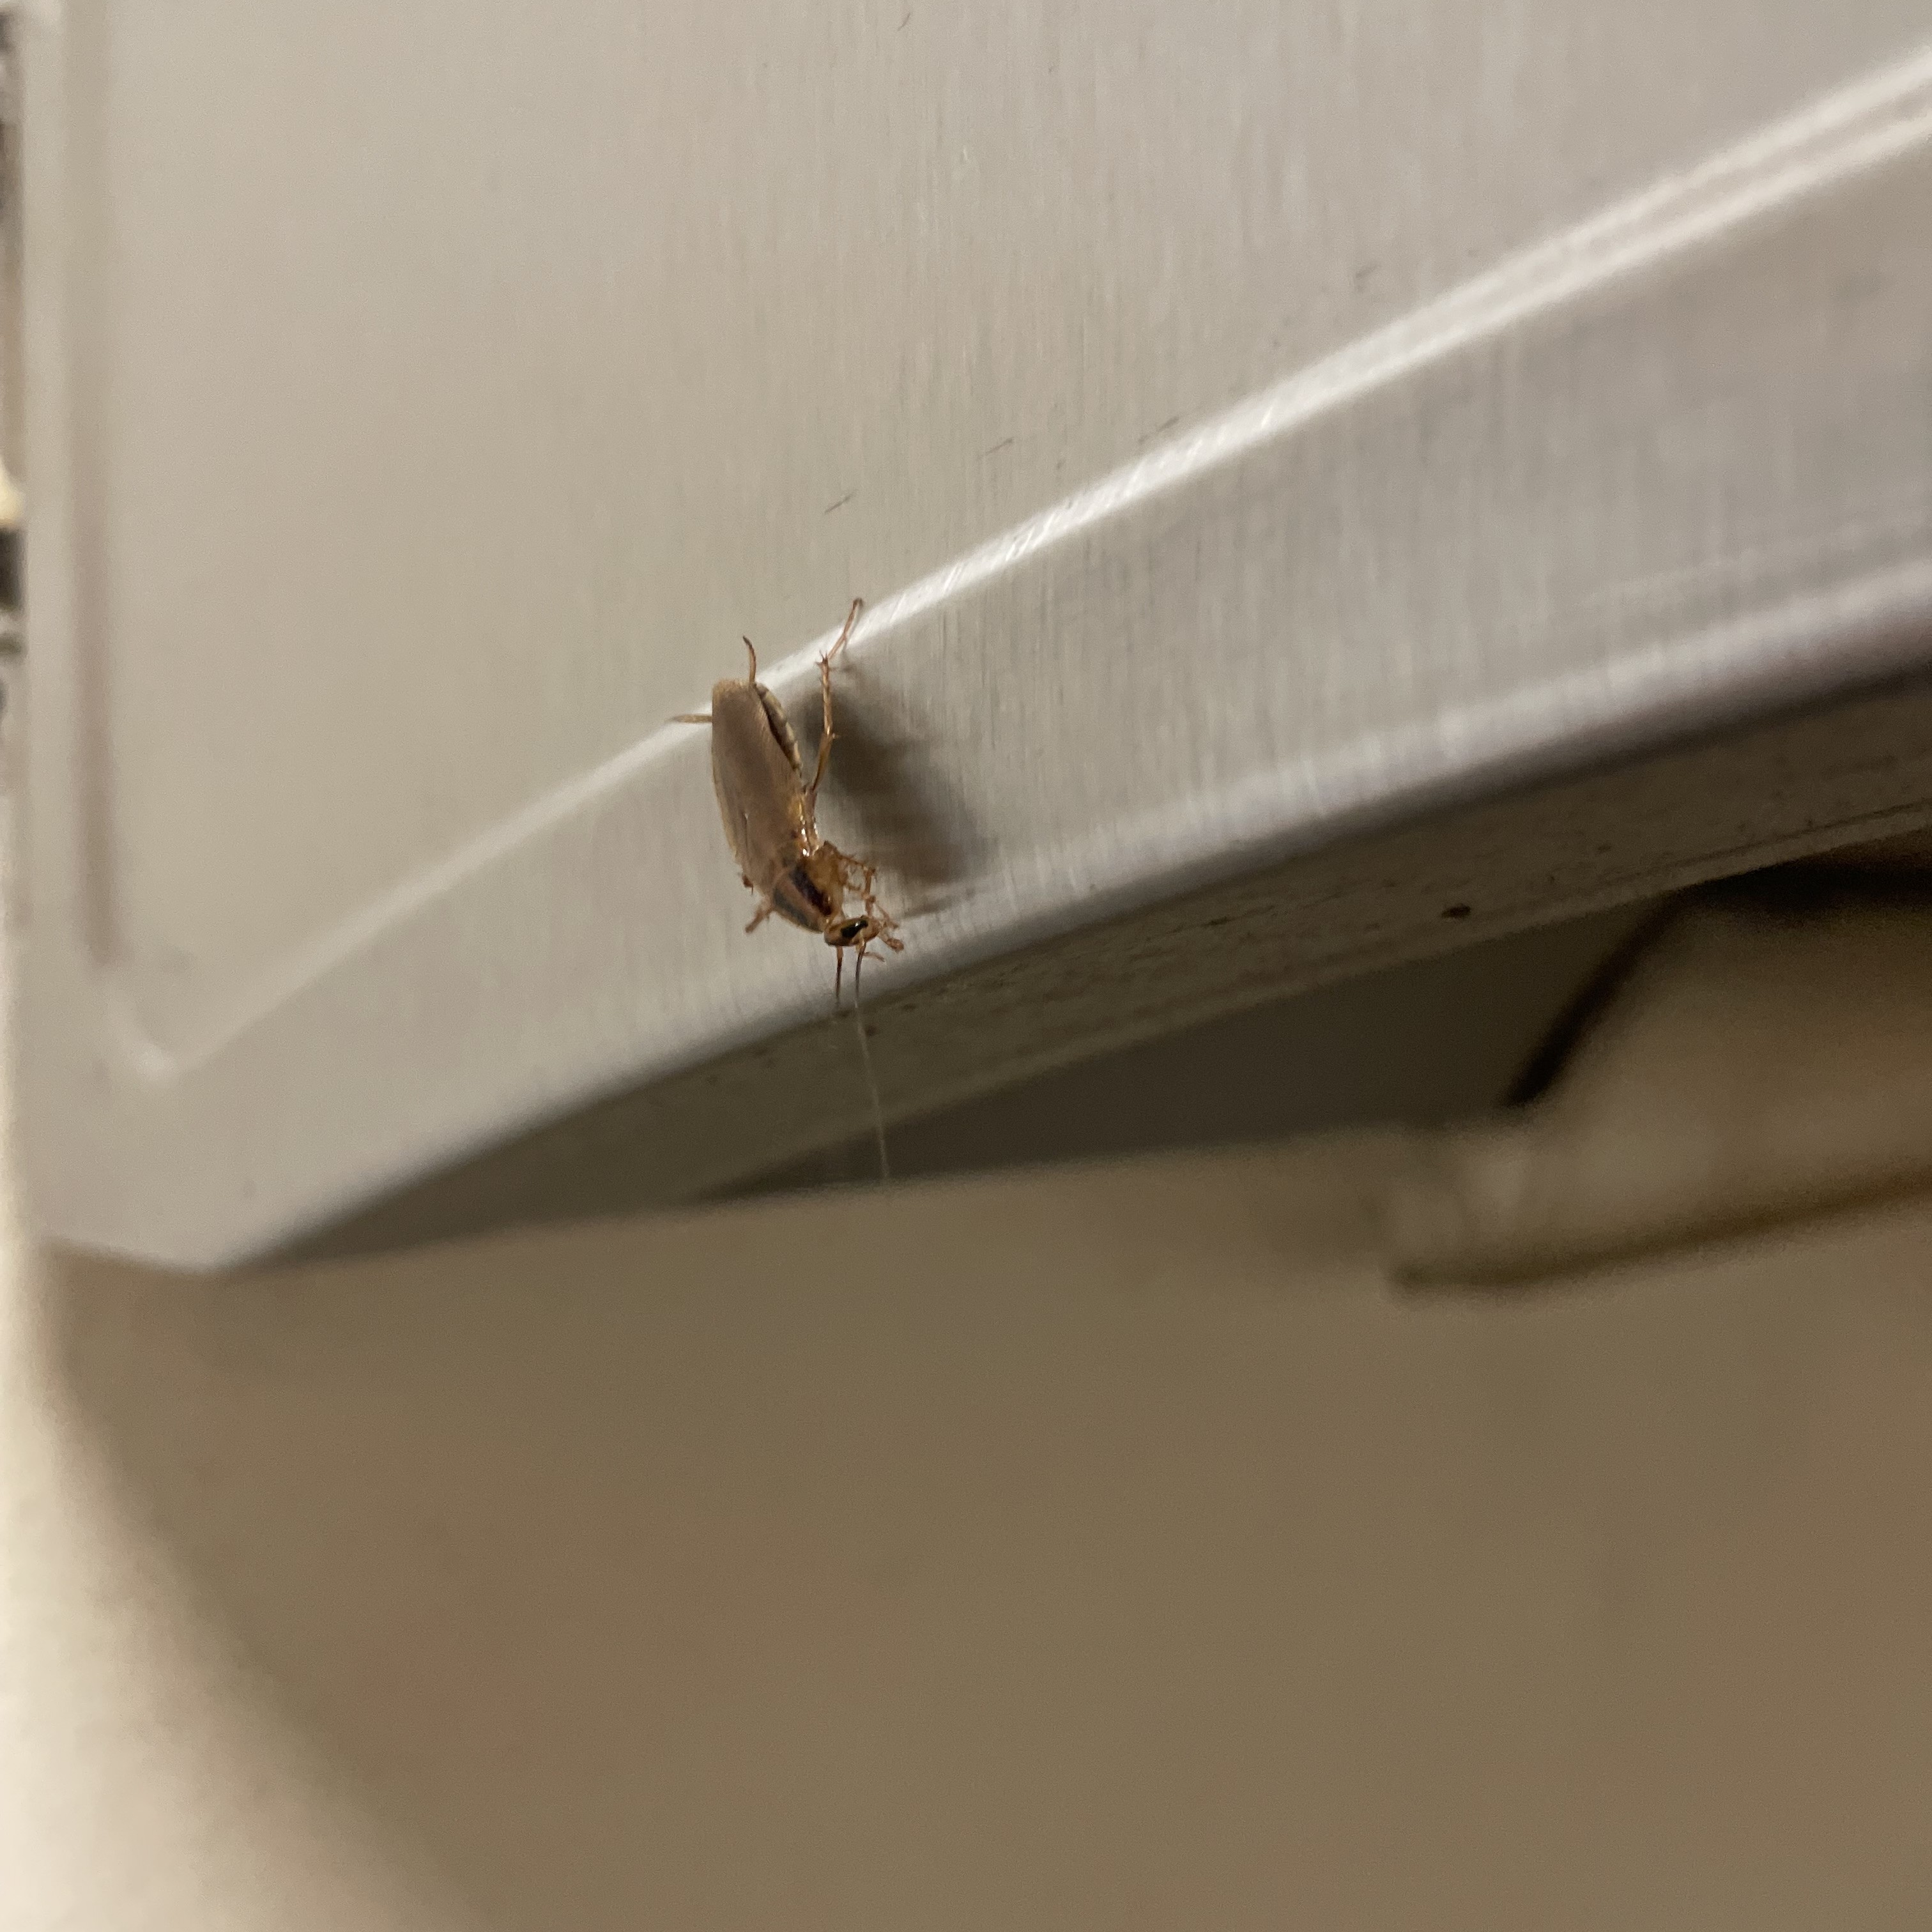 The image shows a small cockroach on a metallic surface, likely part of an appliance or a piece of furniture. The cockroach is positioned on the edge of the surface, and the background is a light-colored wall. The close-up view highlights the details of the cockroach, including its legs and antennae. This setting suggests a potential pest issue that might need to be addressed to maintain cleanliness and hygiene.